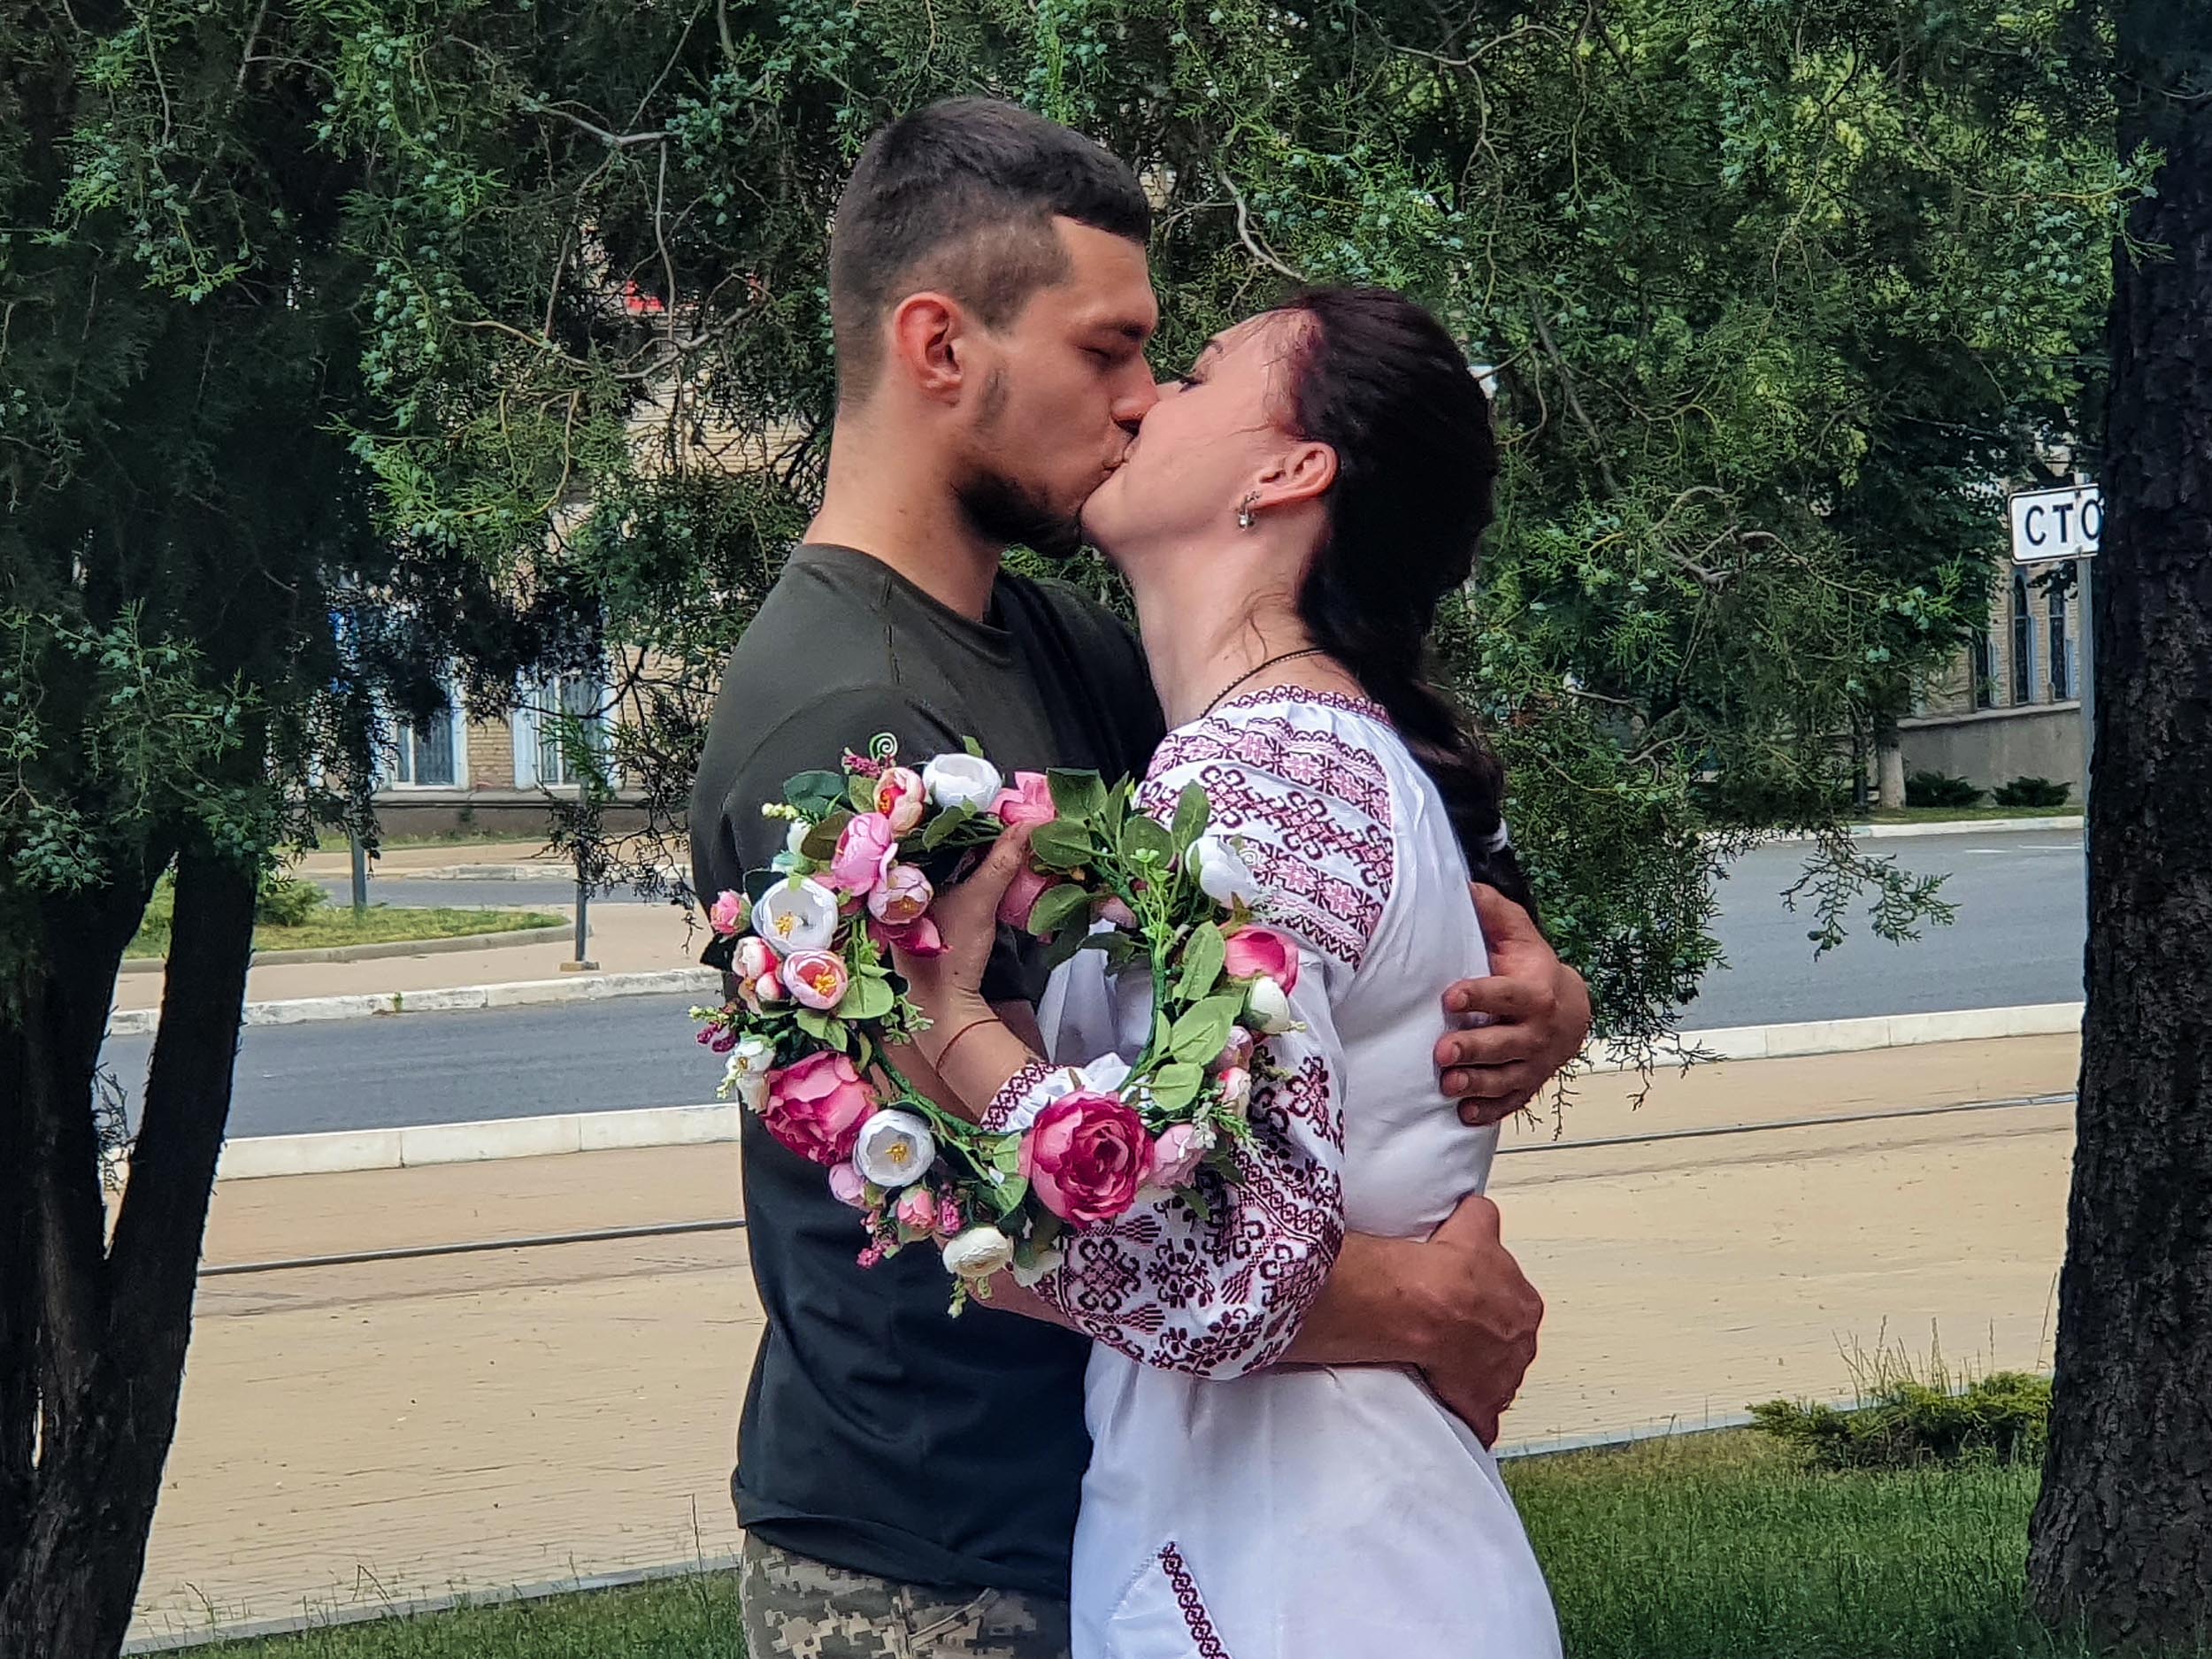 Two military couples who met at war celebrate wedding in Donbas